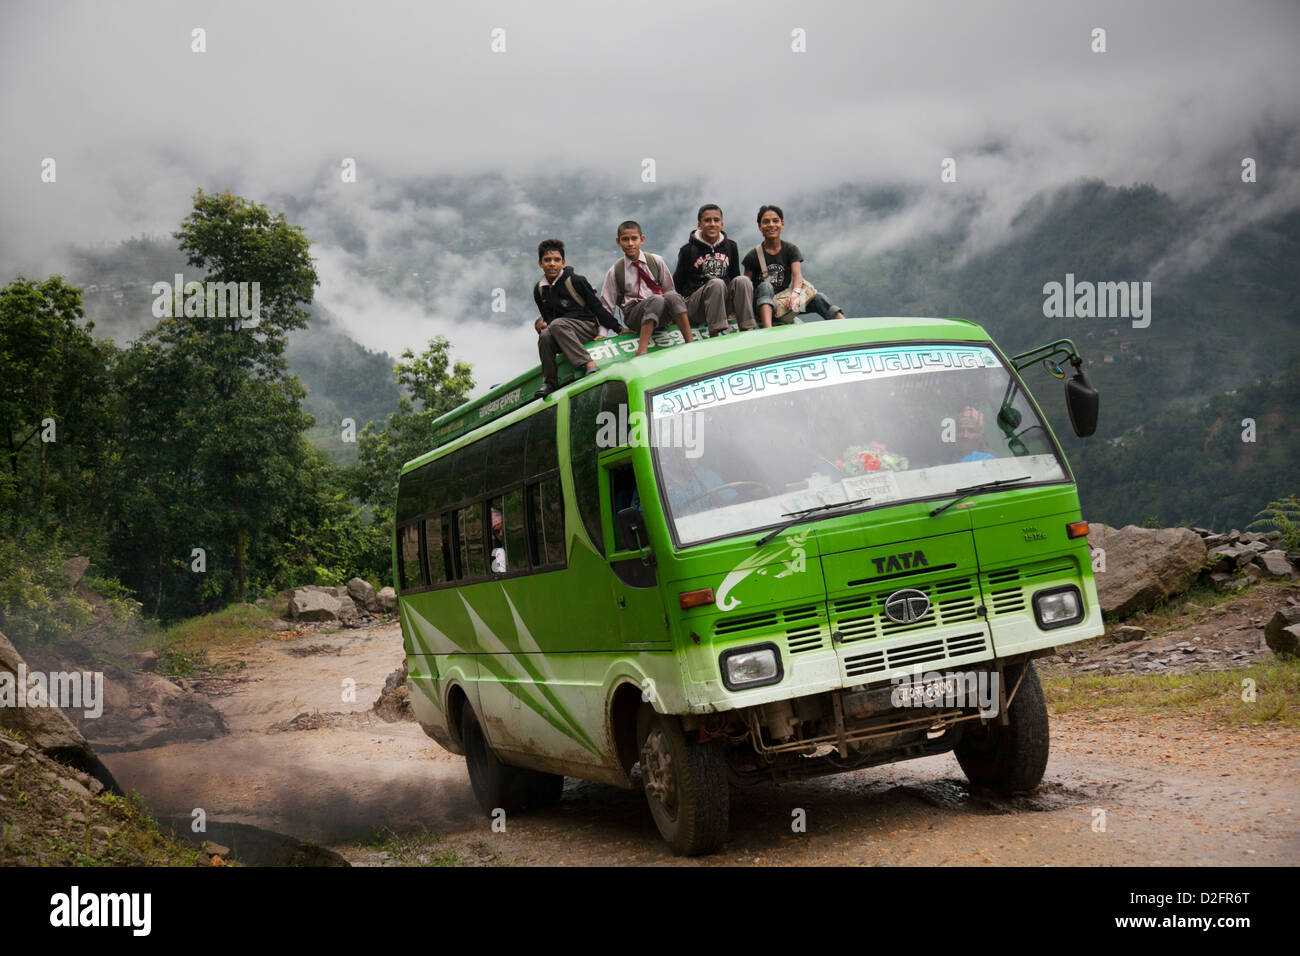 A bus makes it's way through the mountains in Dolakha district. The roads are rough and some passengers are on the rooftop. Stock Photo